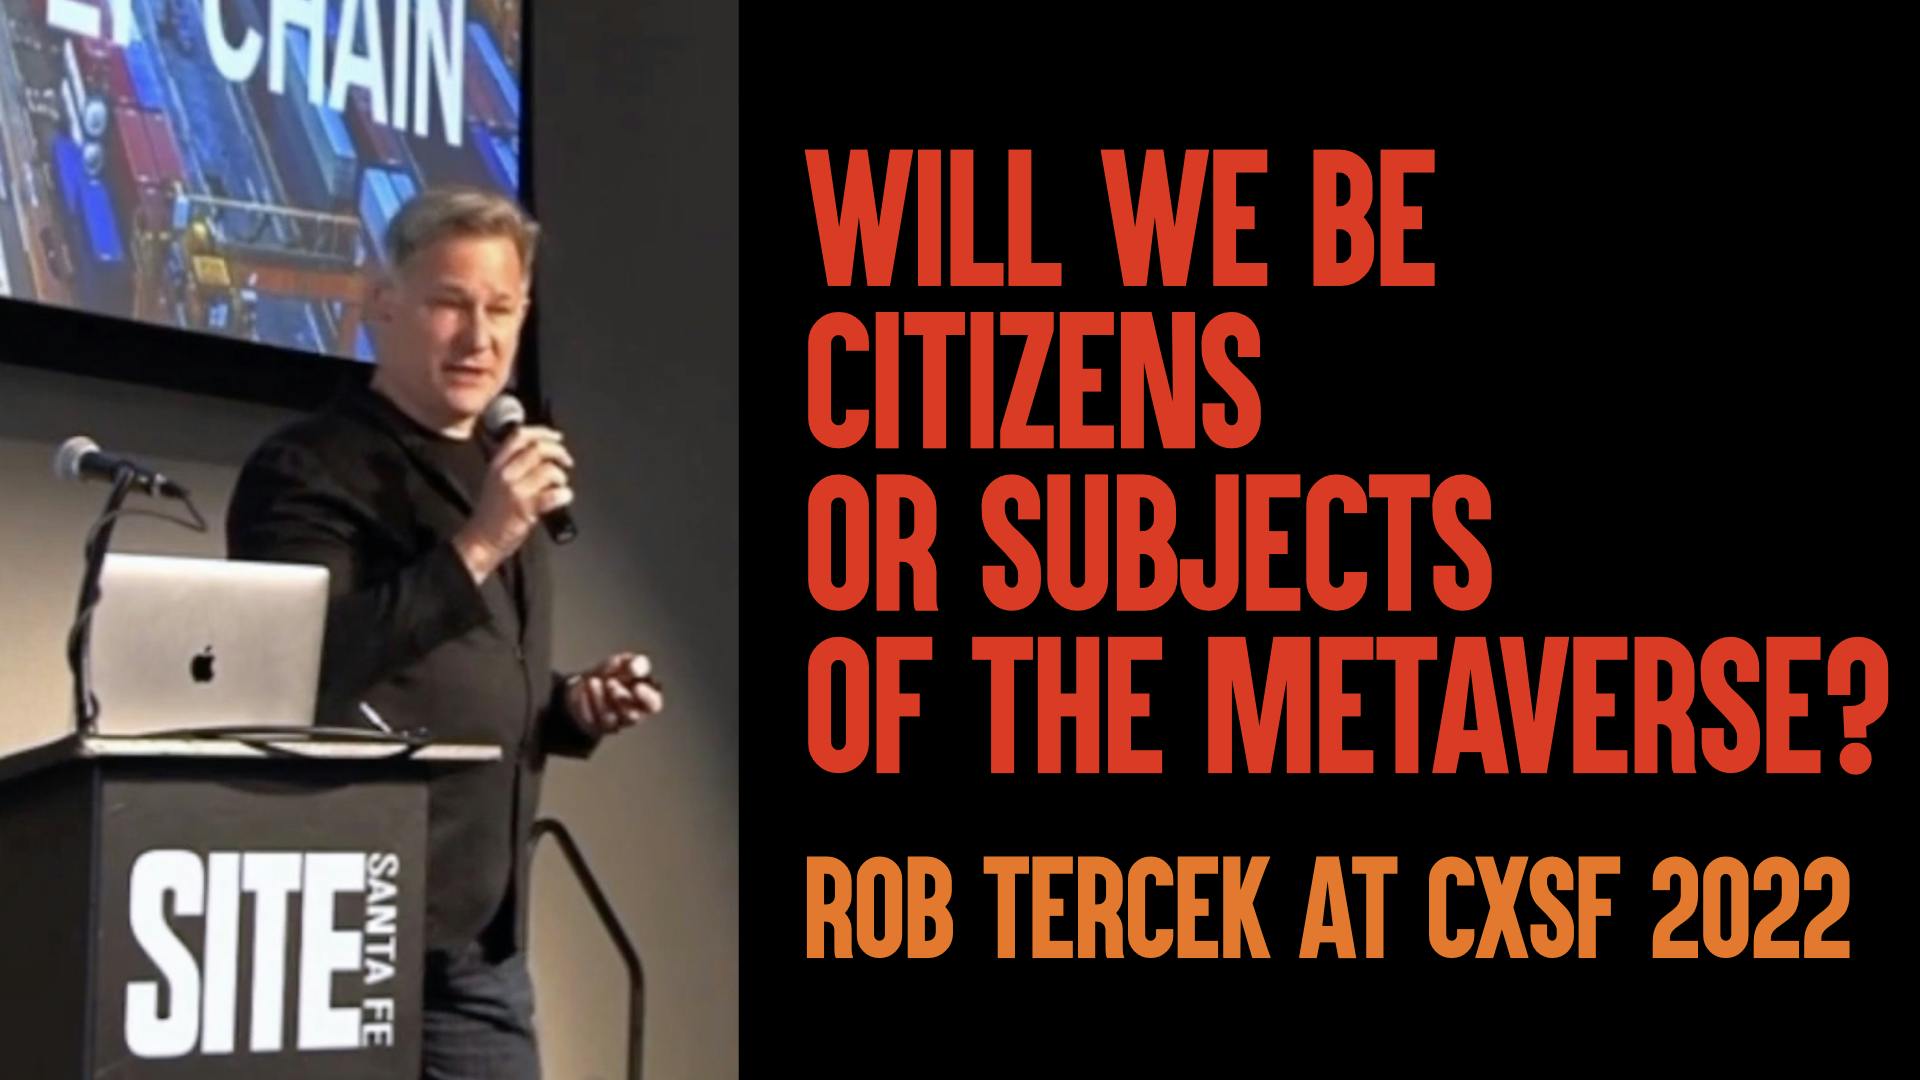 Robert tercek speaking to an audience with title Will we be citizens or subjects of the metaverse?